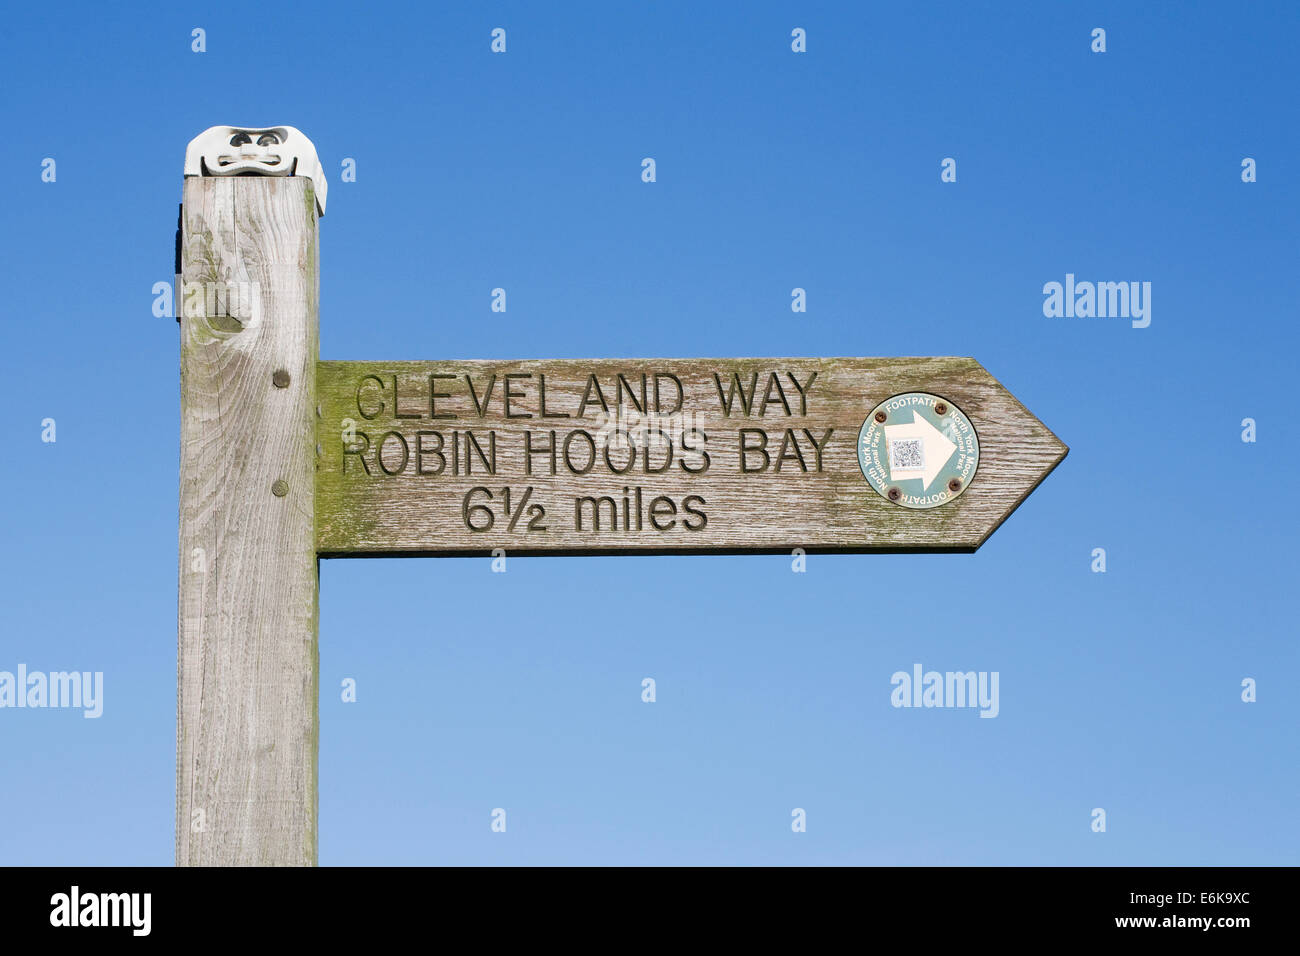 Public footpath signpost for the Cleveland Way. UK. Stock Photo